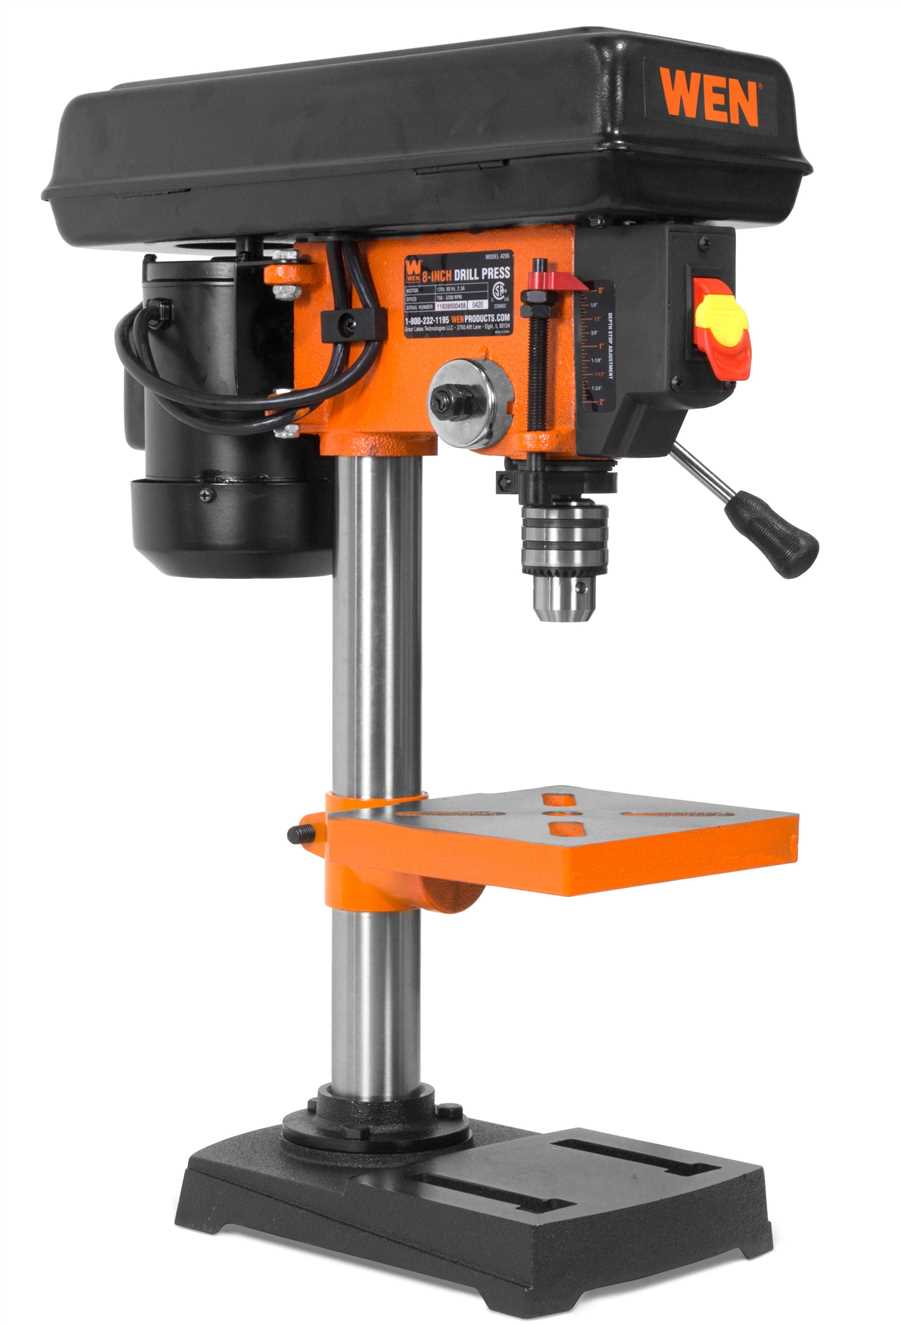 Top-Rated Drill Presses on the Market